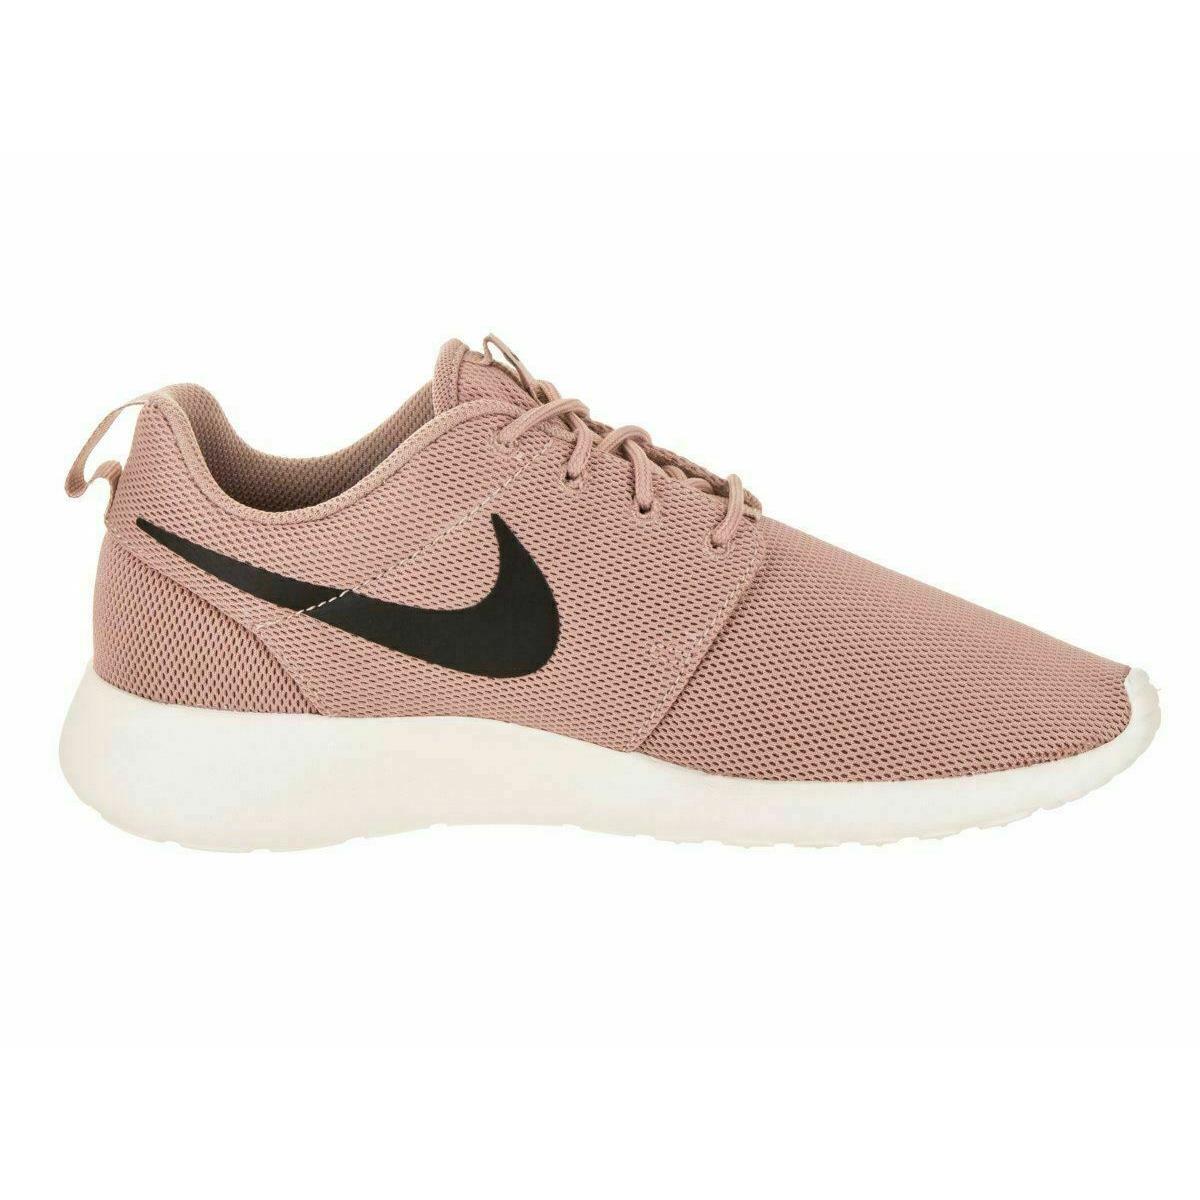 Nike Roshe One 844994-601 Women`s Brown White Athletic Running Shoes HS2136 - Brown & White